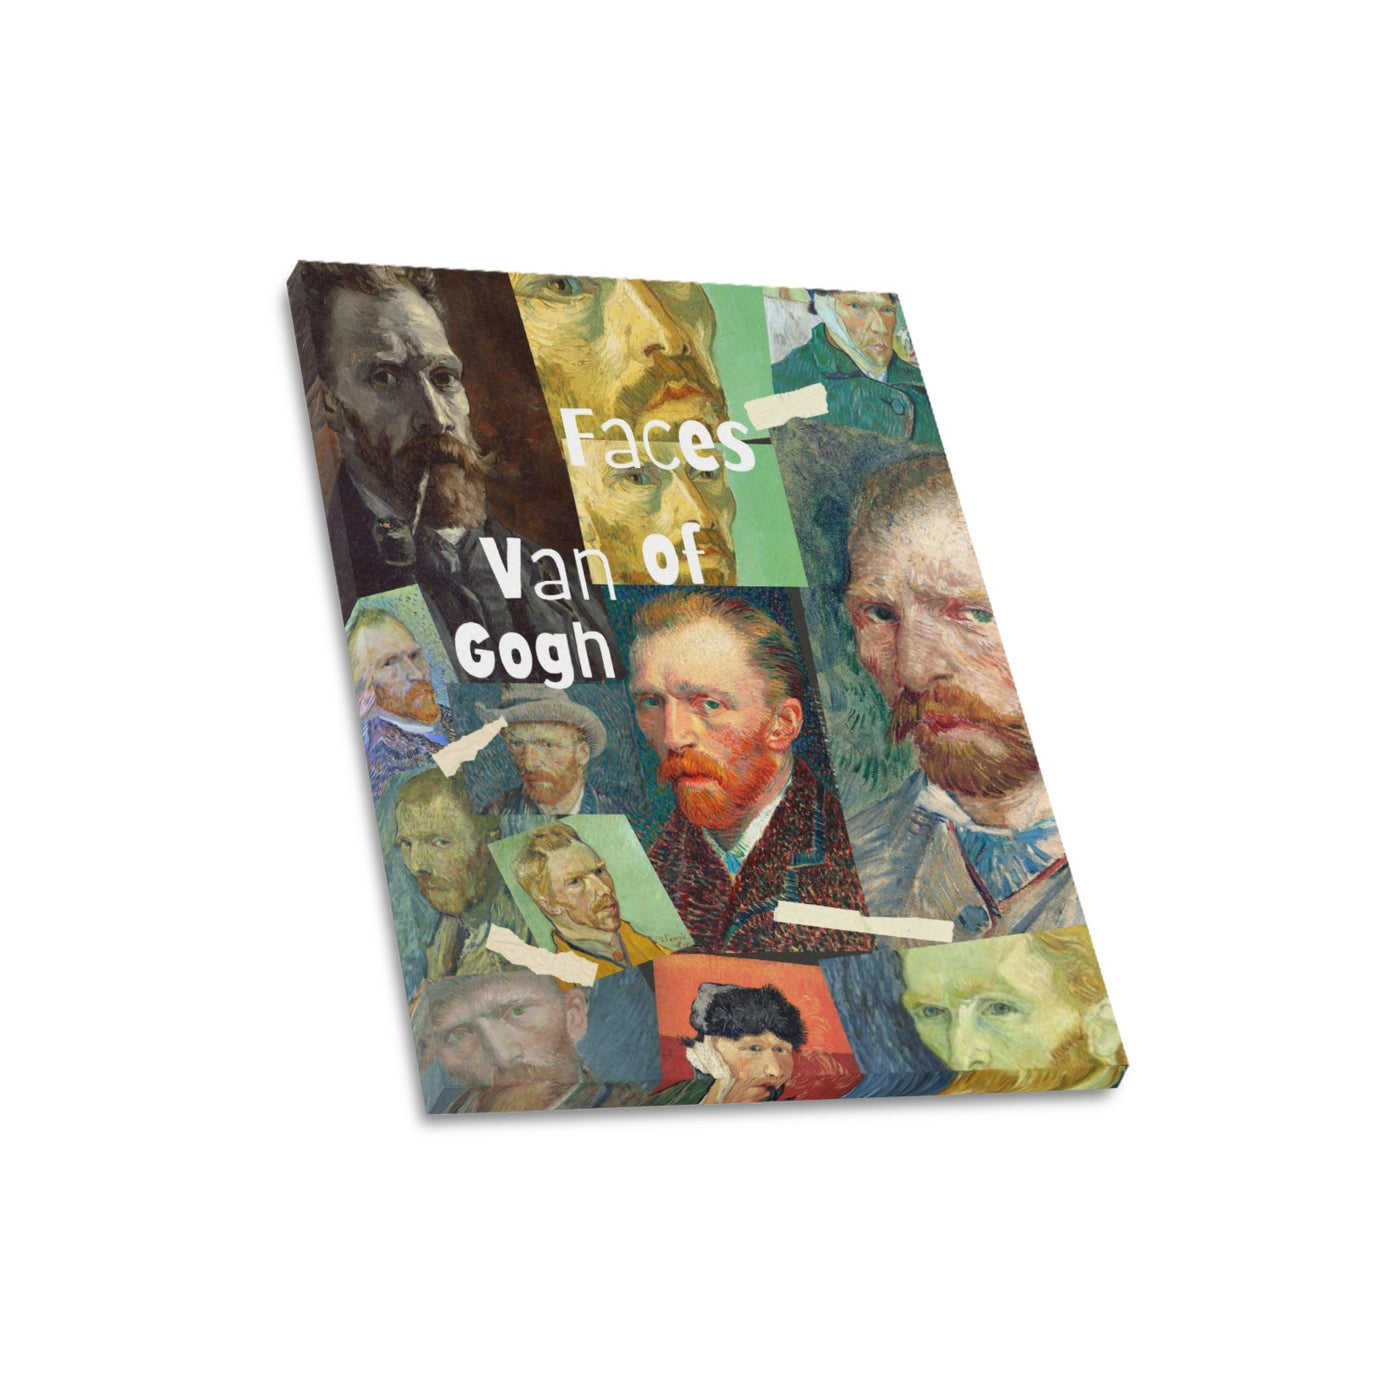 Faces of Van Gogh Frame Canvas Print 16"x20"(Made in USA)